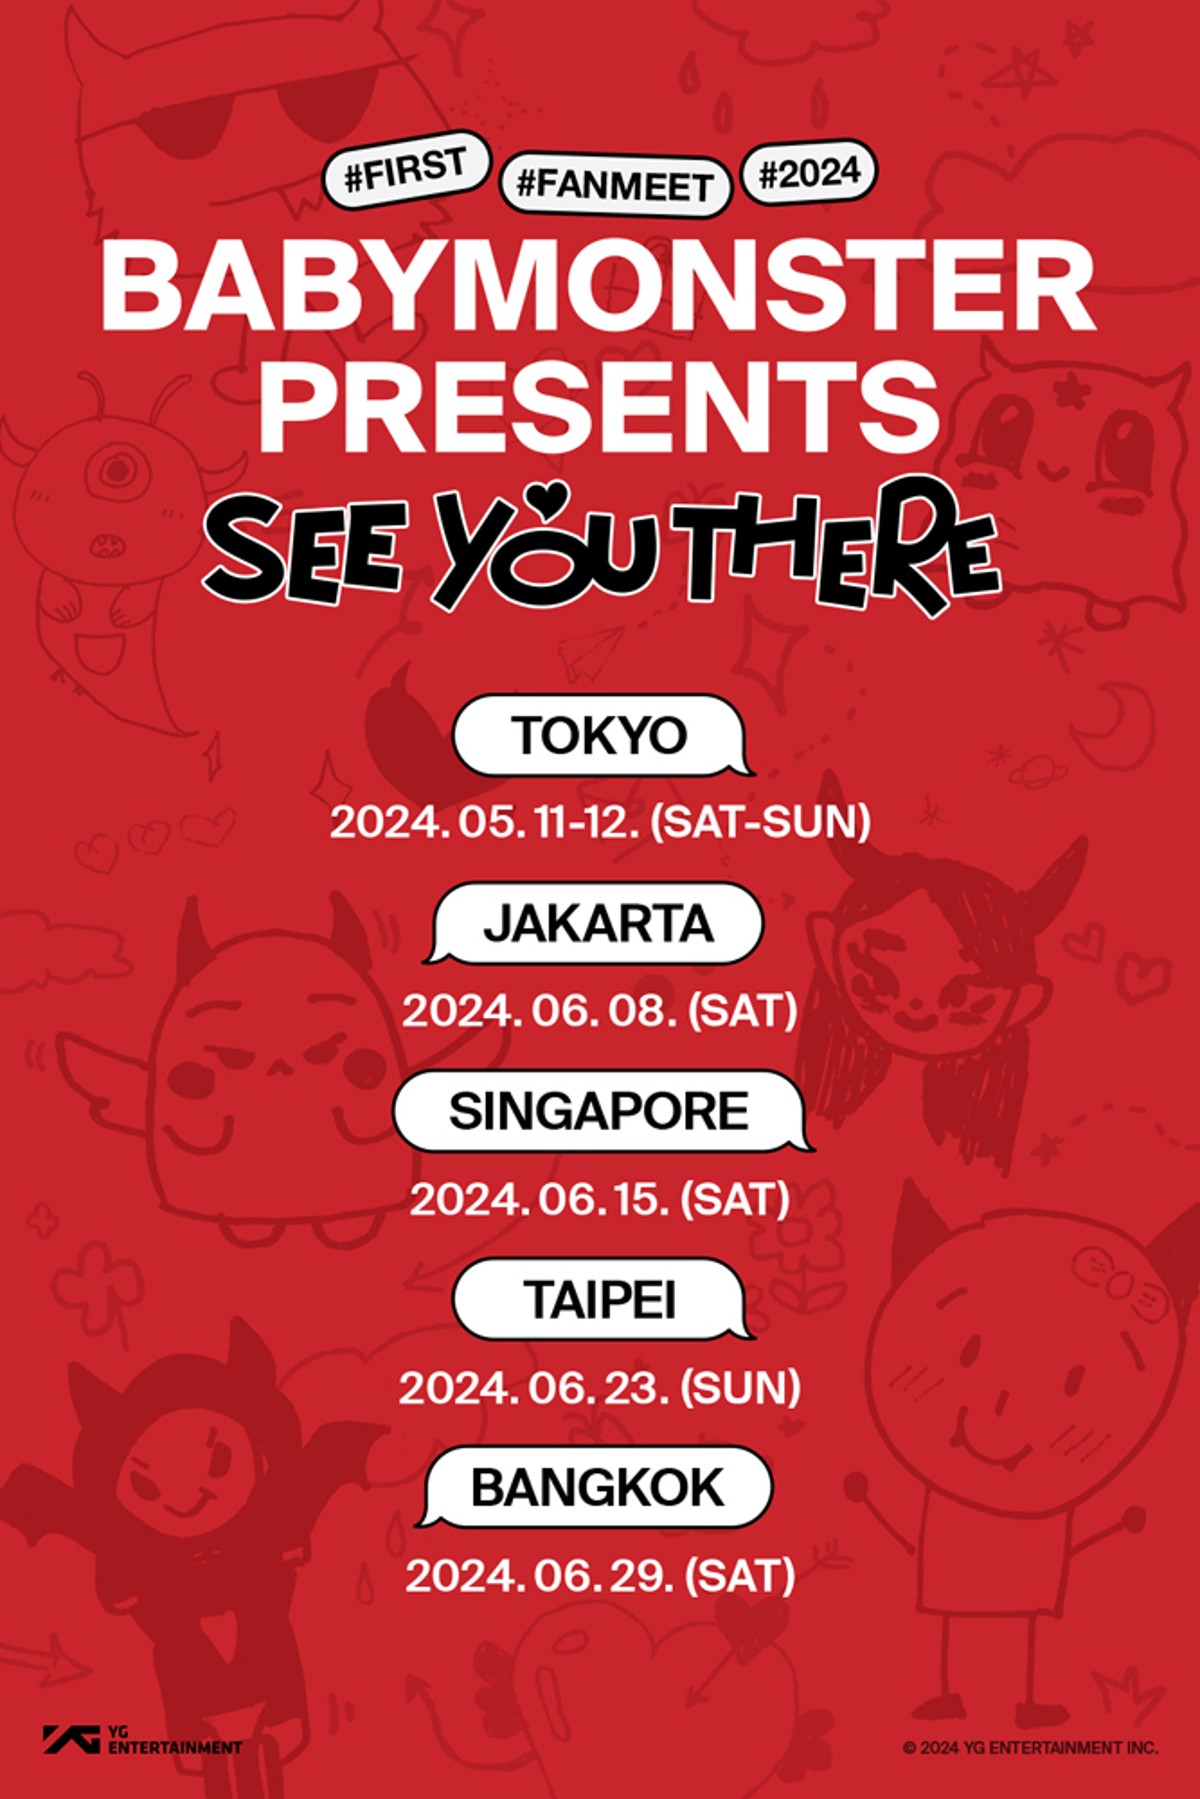 「BABYMONSTER PRESENTS : SEE YOU THERE SCHEDULE」